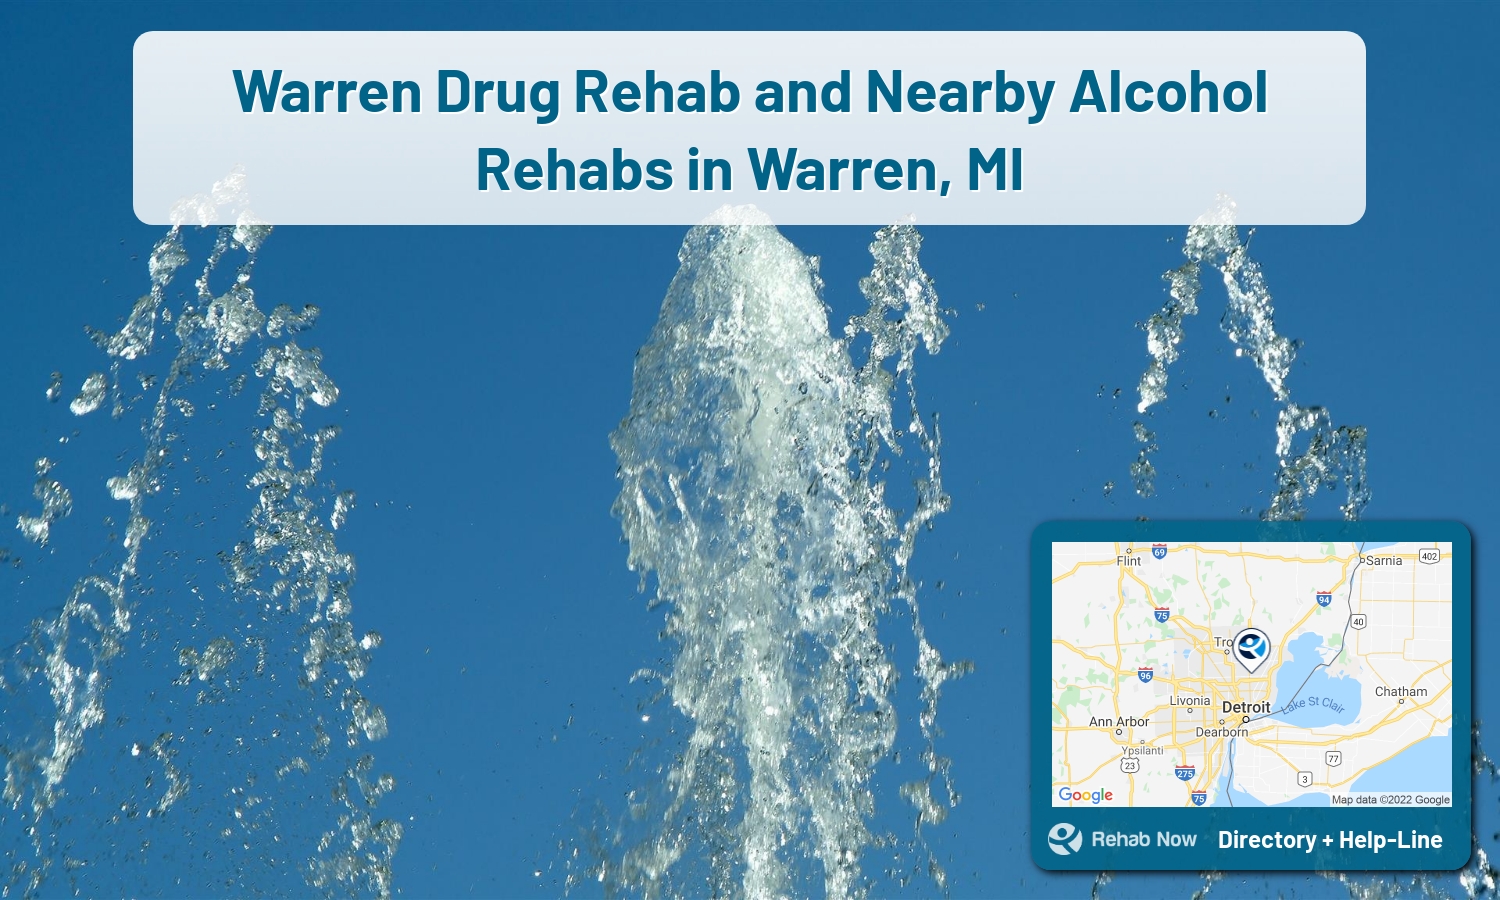 Warren, MI Treatment Centers. Find drug rehab in Warren, Michigan, or detox and treatment programs. Get the right help now!